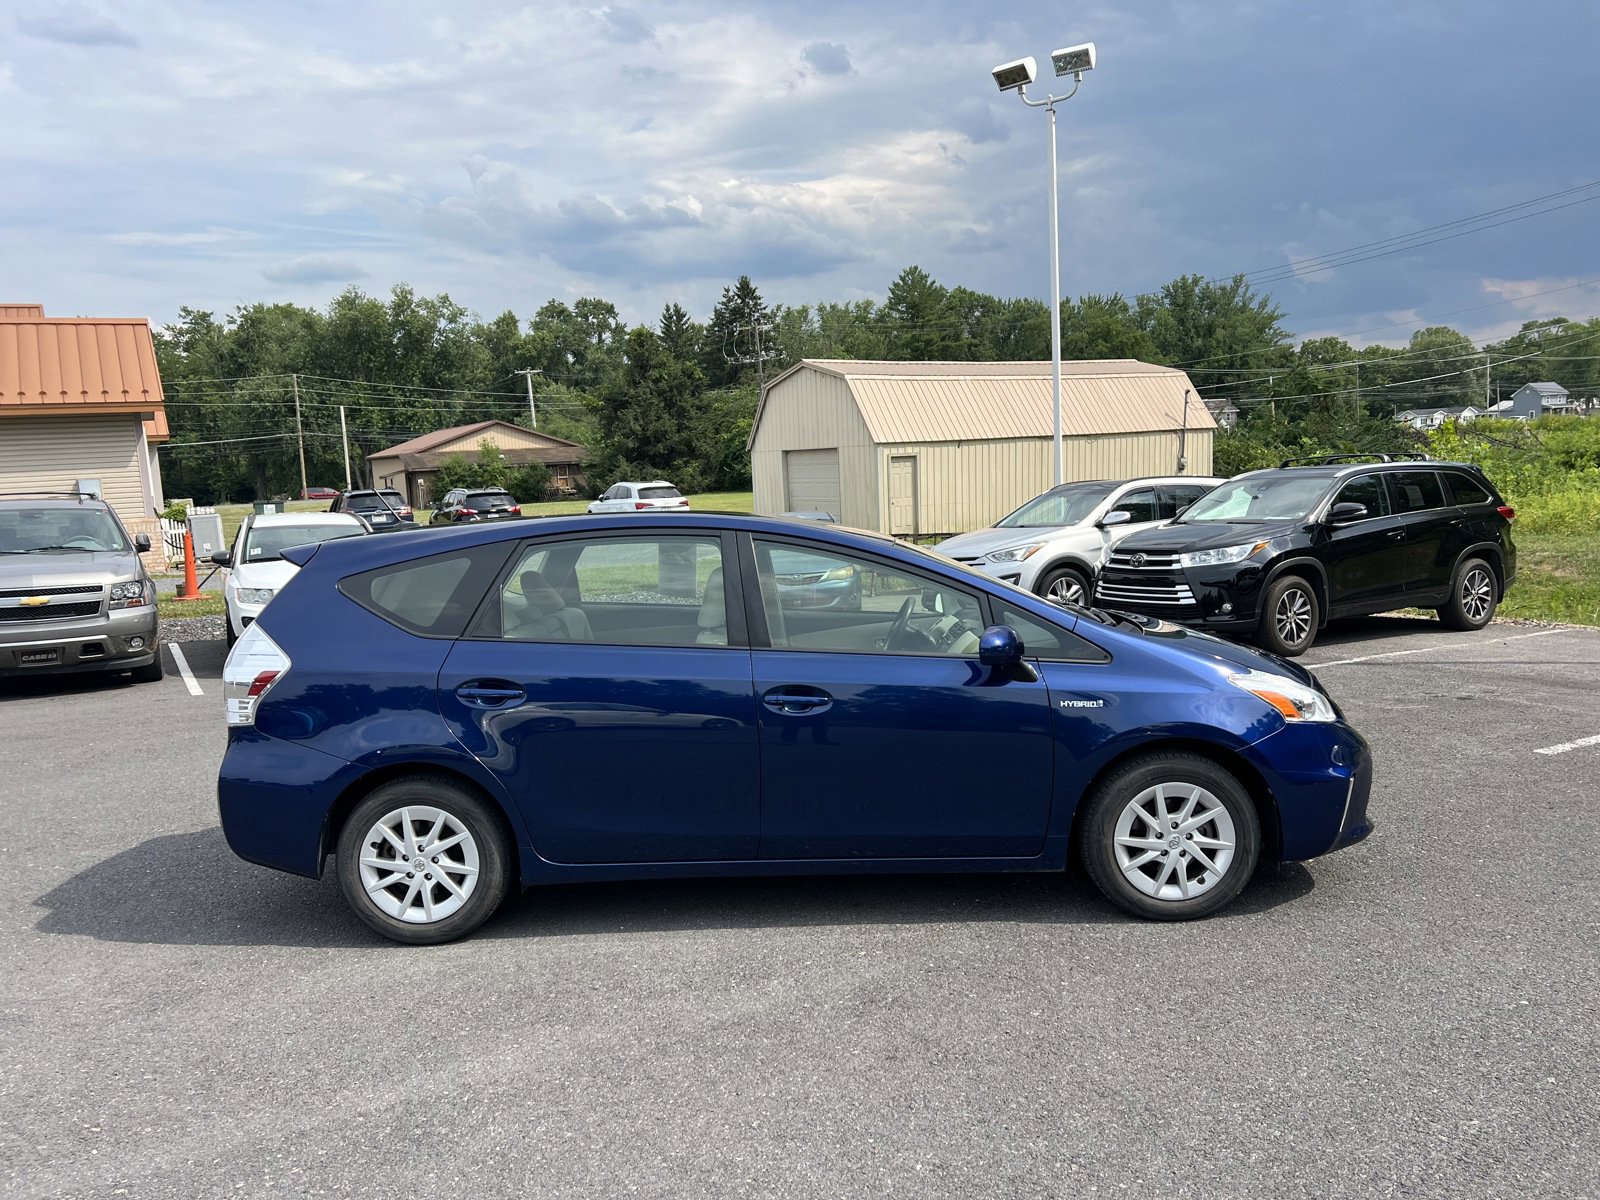 Used 2012 Toyota Prius v Three with VIN JTDZN3EU9C3177445 for sale in Selinsgrove, PA